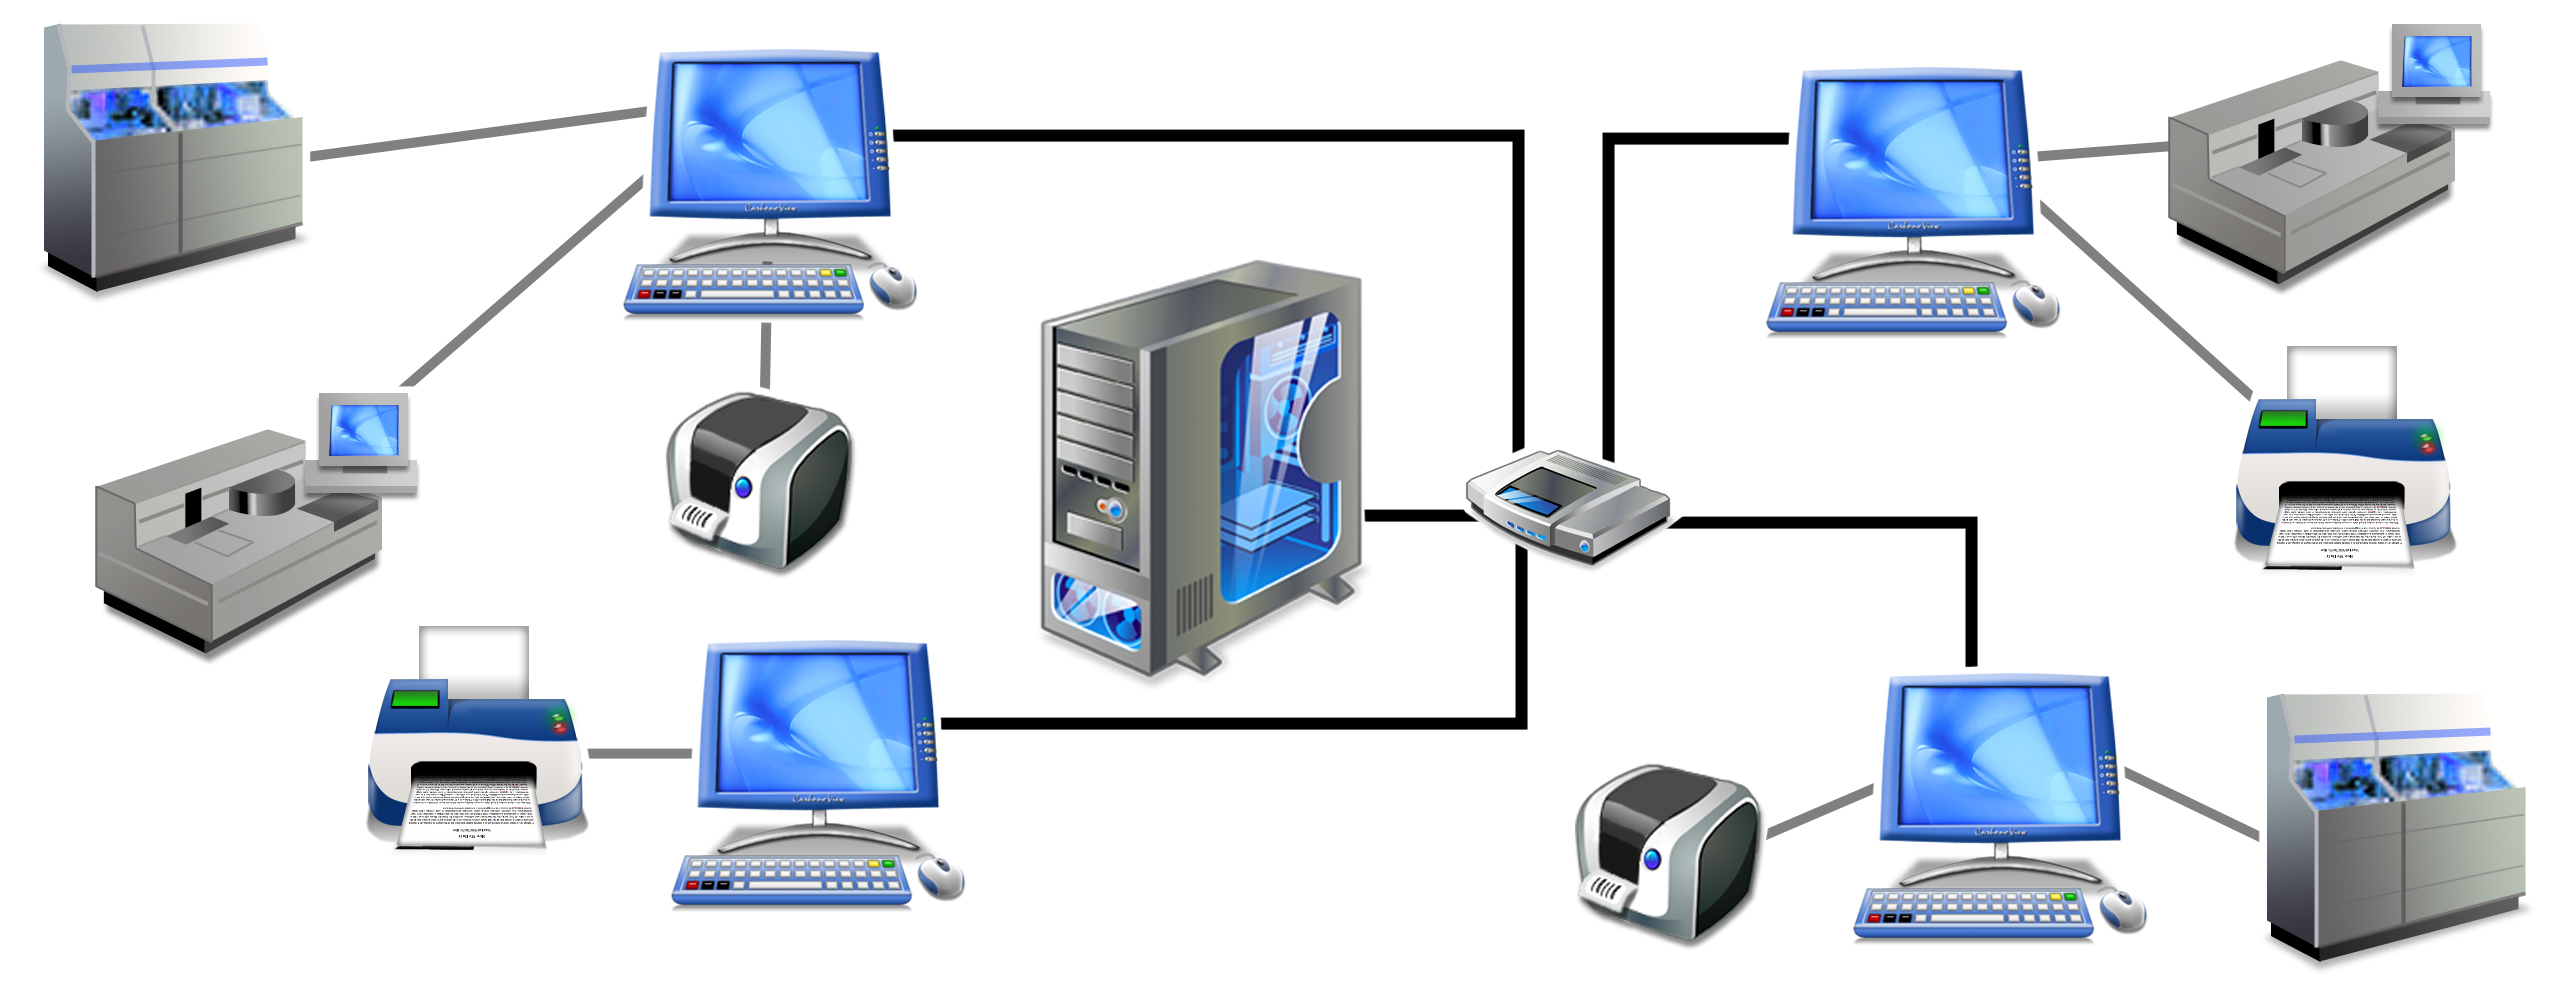 computer networks clipart - photo #24